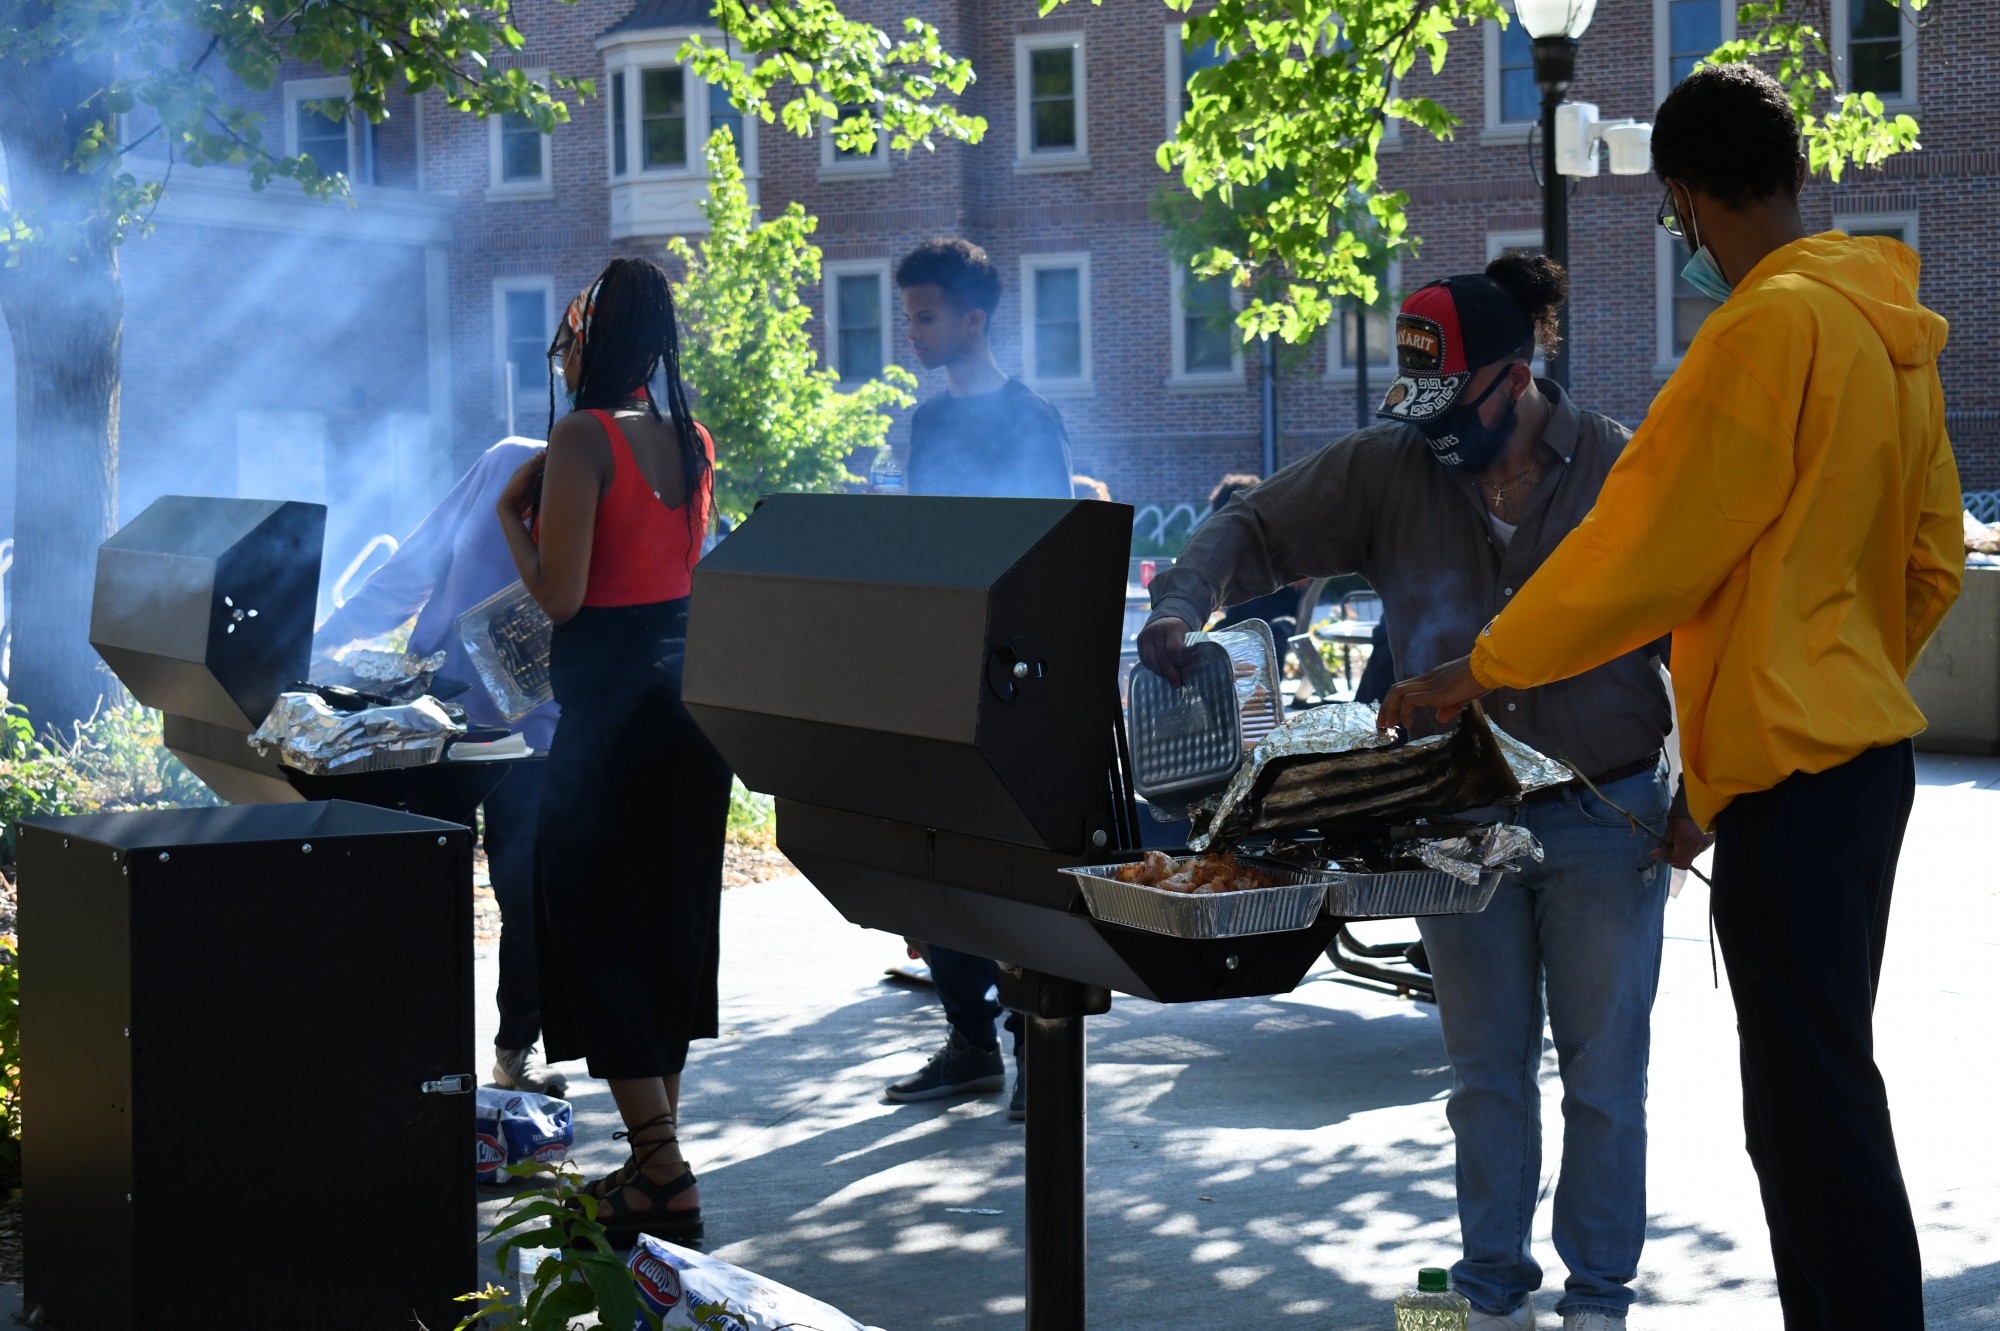 Students celebrate Juneteenth with a dance competition, a cookout, and speeches in the Super block on Saturday, June 20. The celebration was organized by the Black Student Union. (Emily Urfer / Minnesota Daily)